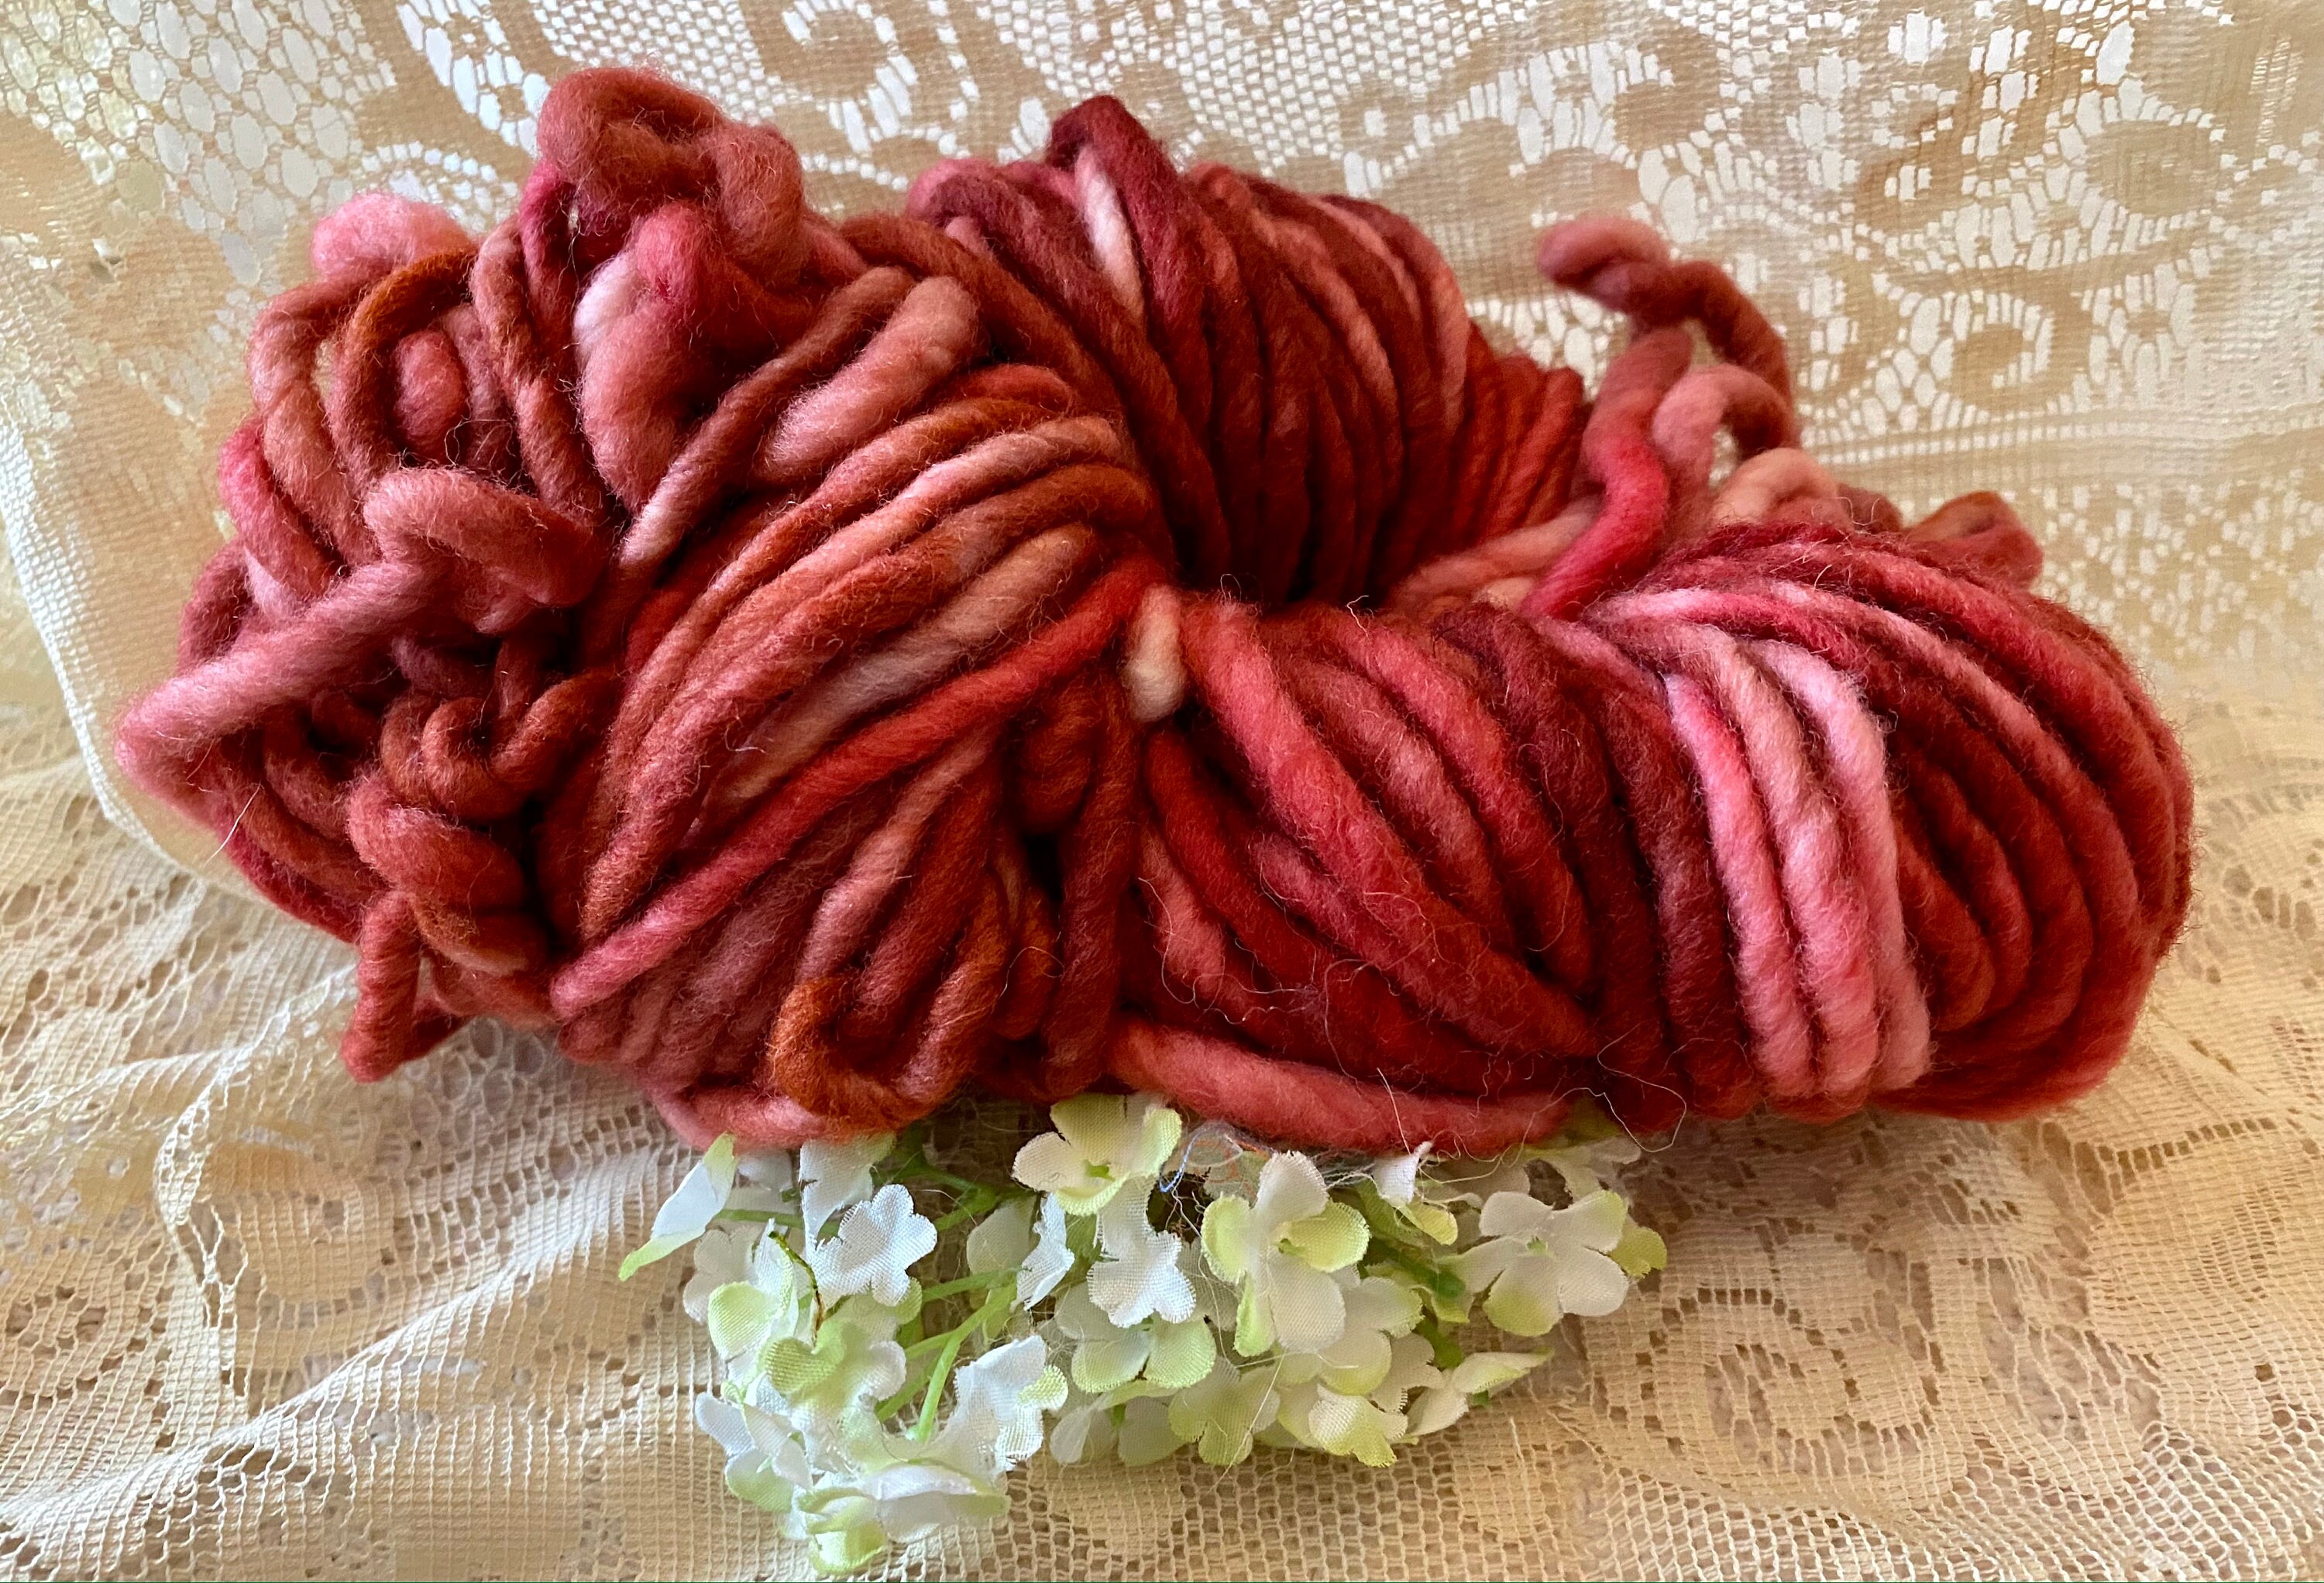 Lotus Pink - Burly Spun Yarn by Brown Sheep Co. 8oz 100% Wool Single Ply,  Super Bulky Yarn for Rug Hooking, Punch Needle or Weaving - Two Sizes to